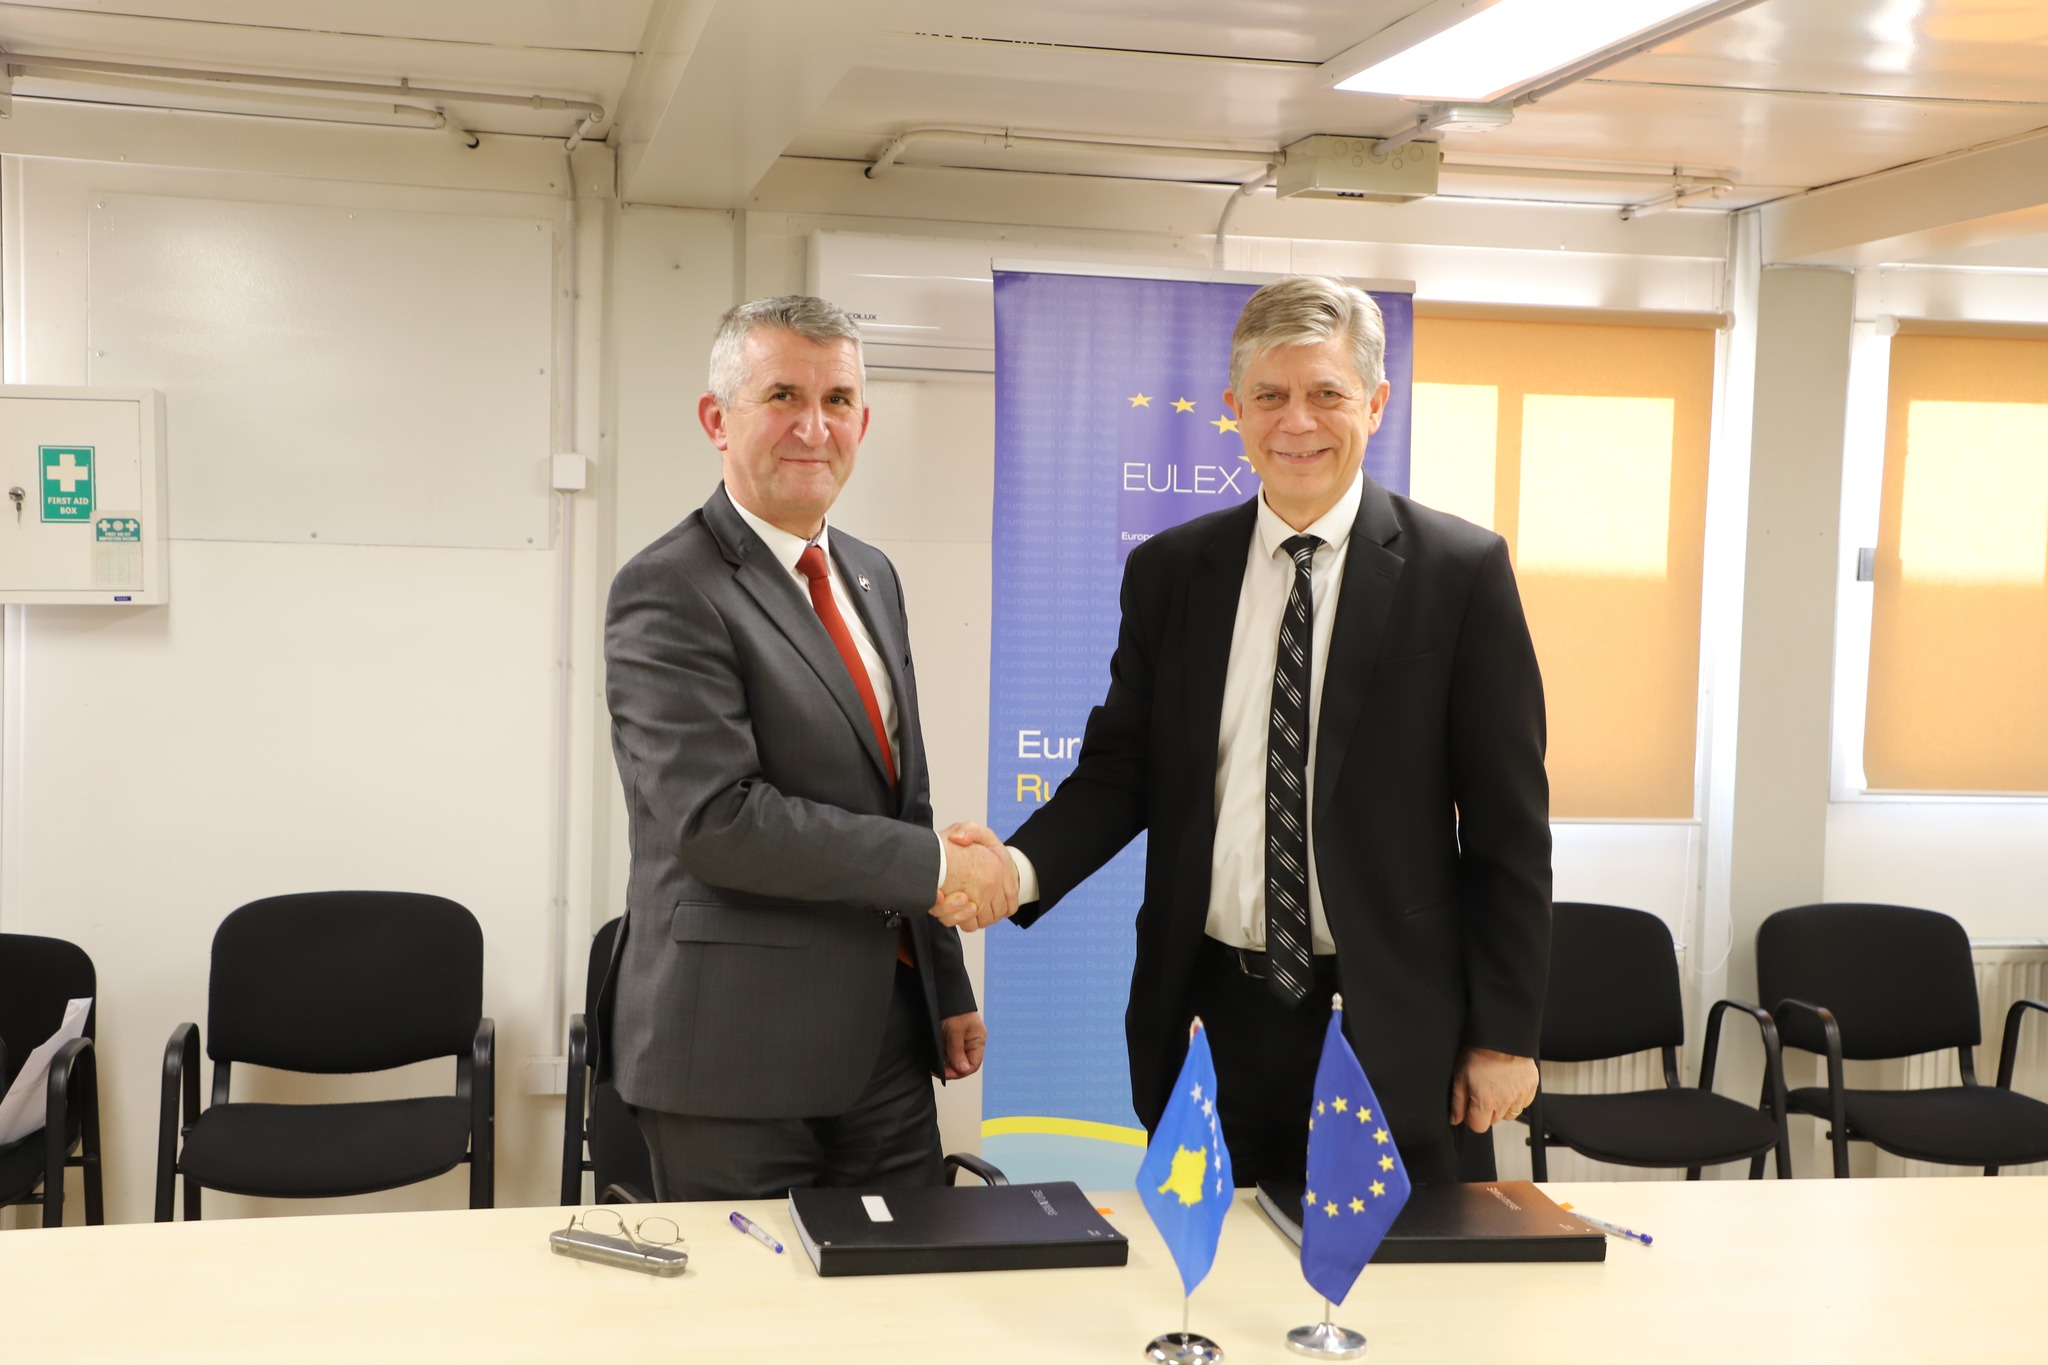 EULEX donates IT equipment to the Agency for the Administration of Sequestrated or Confiscated Assets